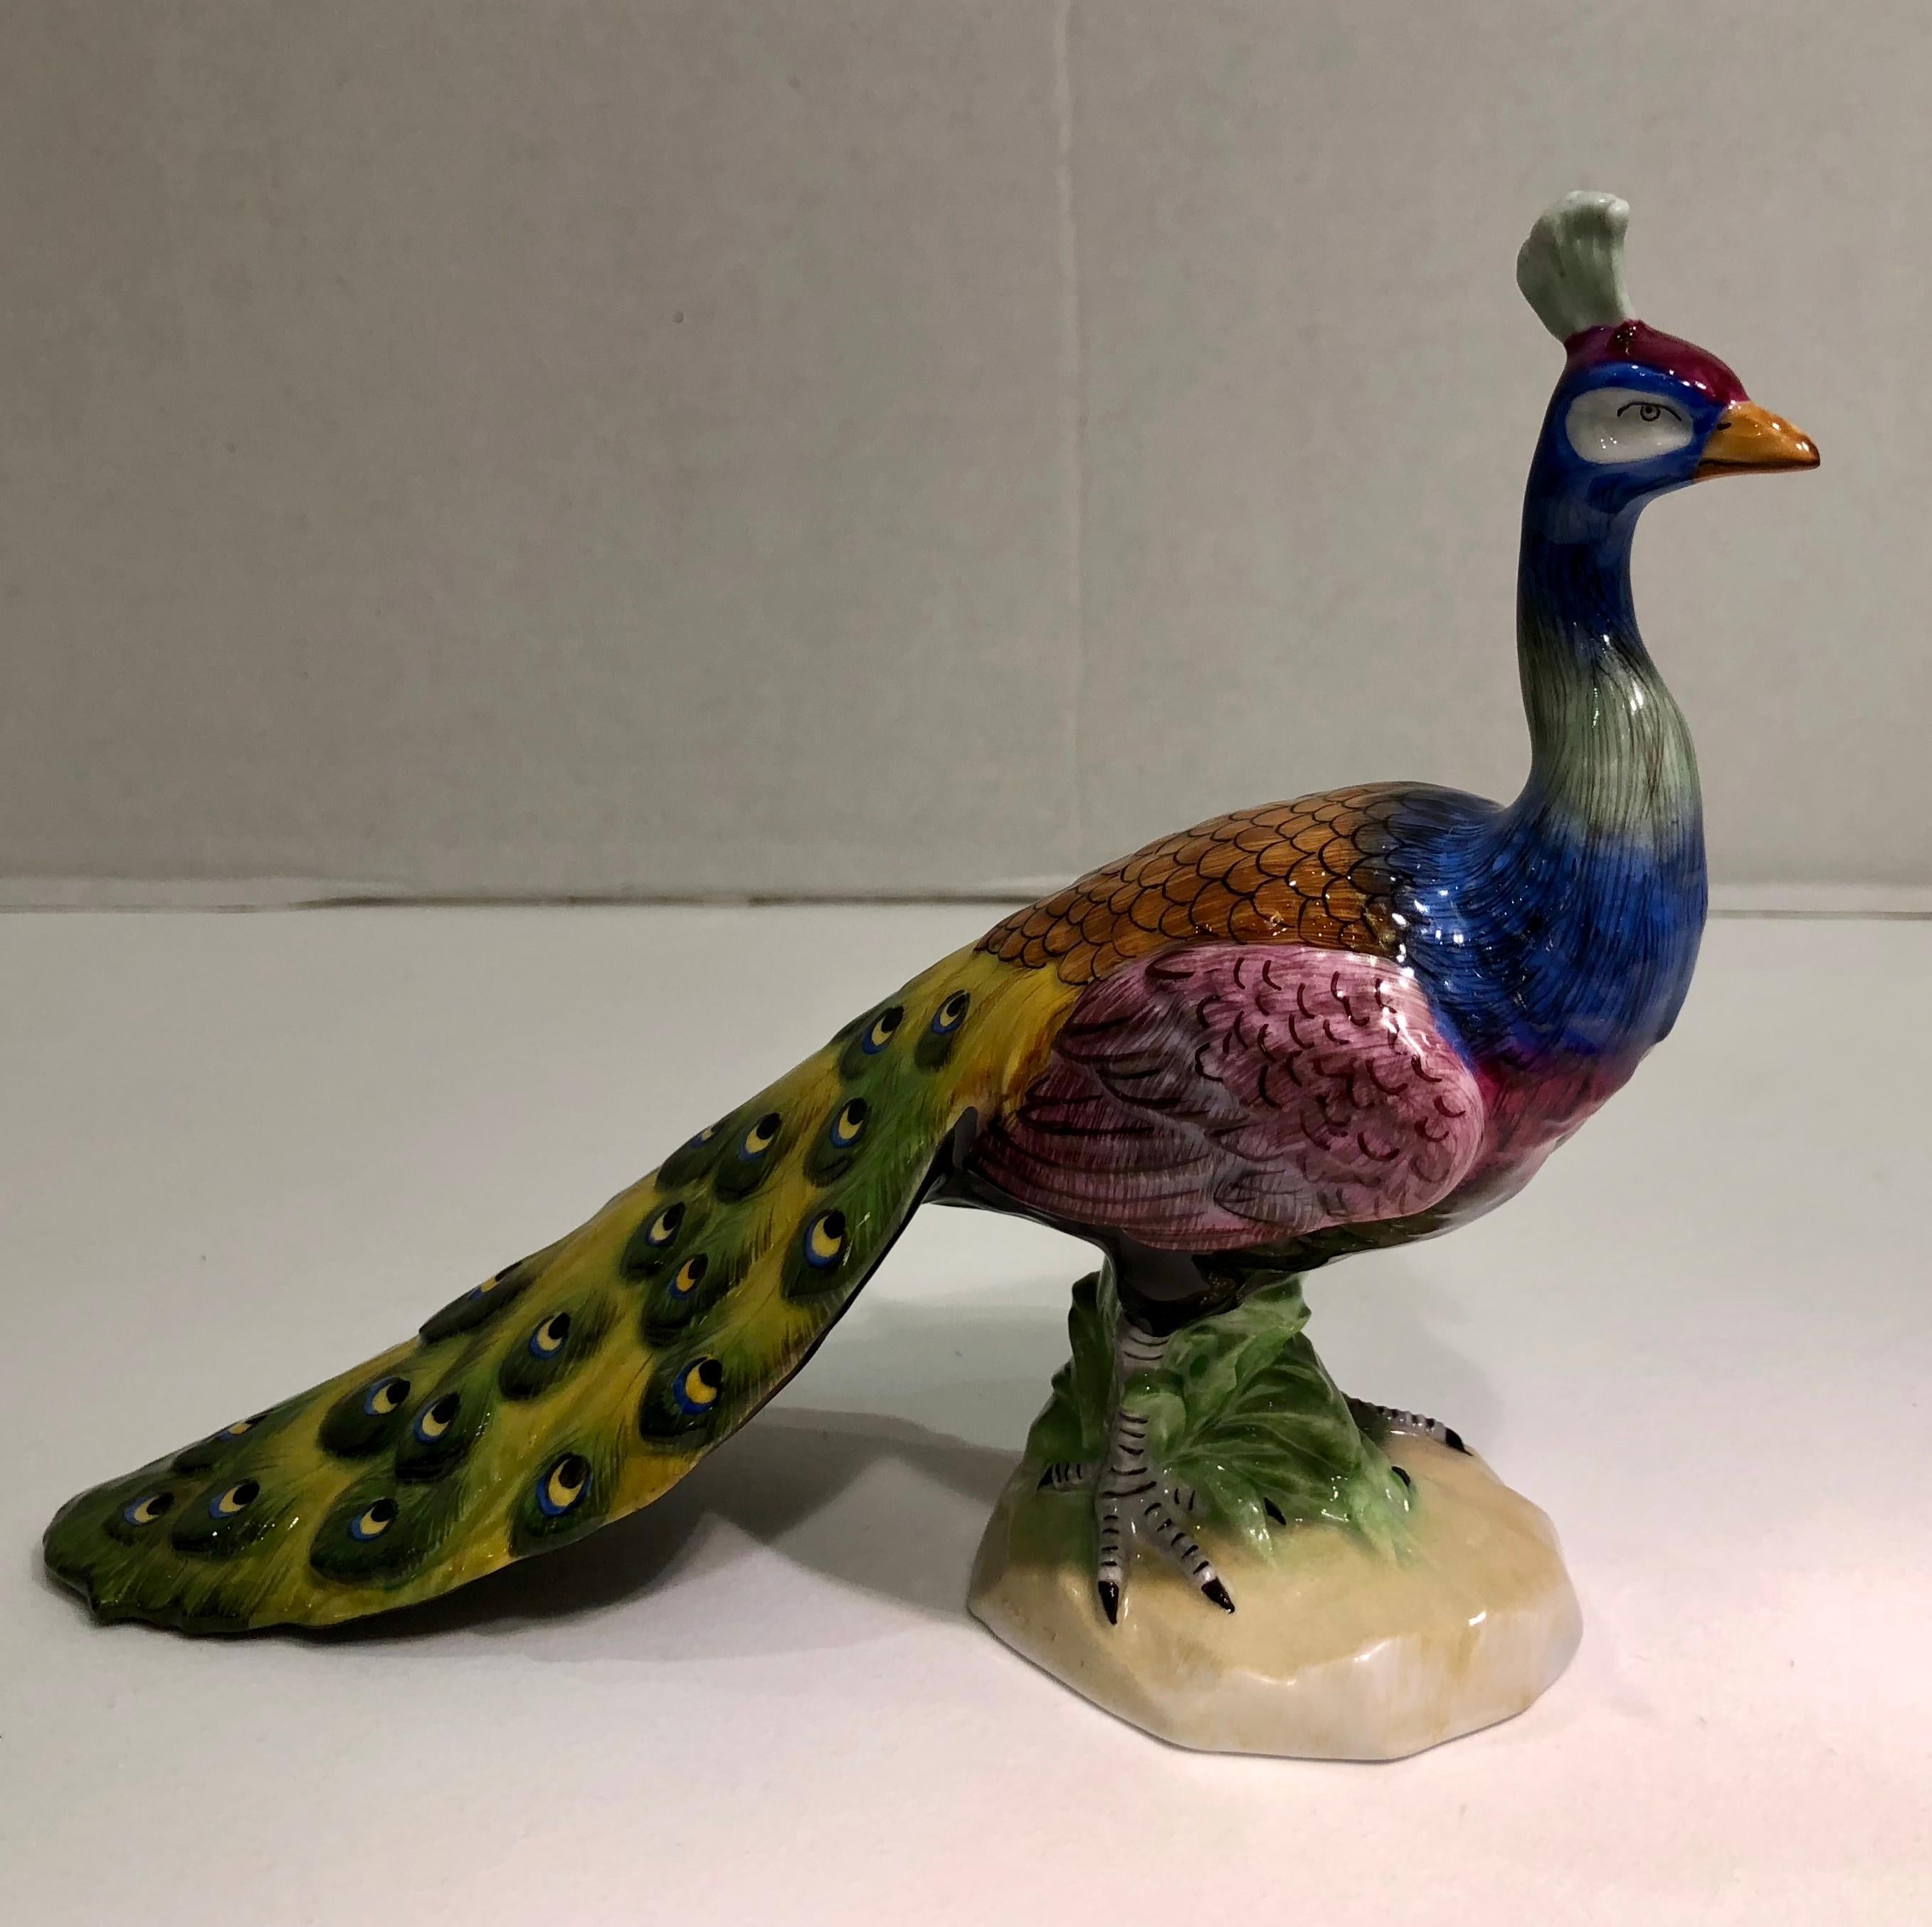 Porcelaine Exquise Dresden Porcelain Peacock Tail Closed Facing Forward Figurine Germany en vente